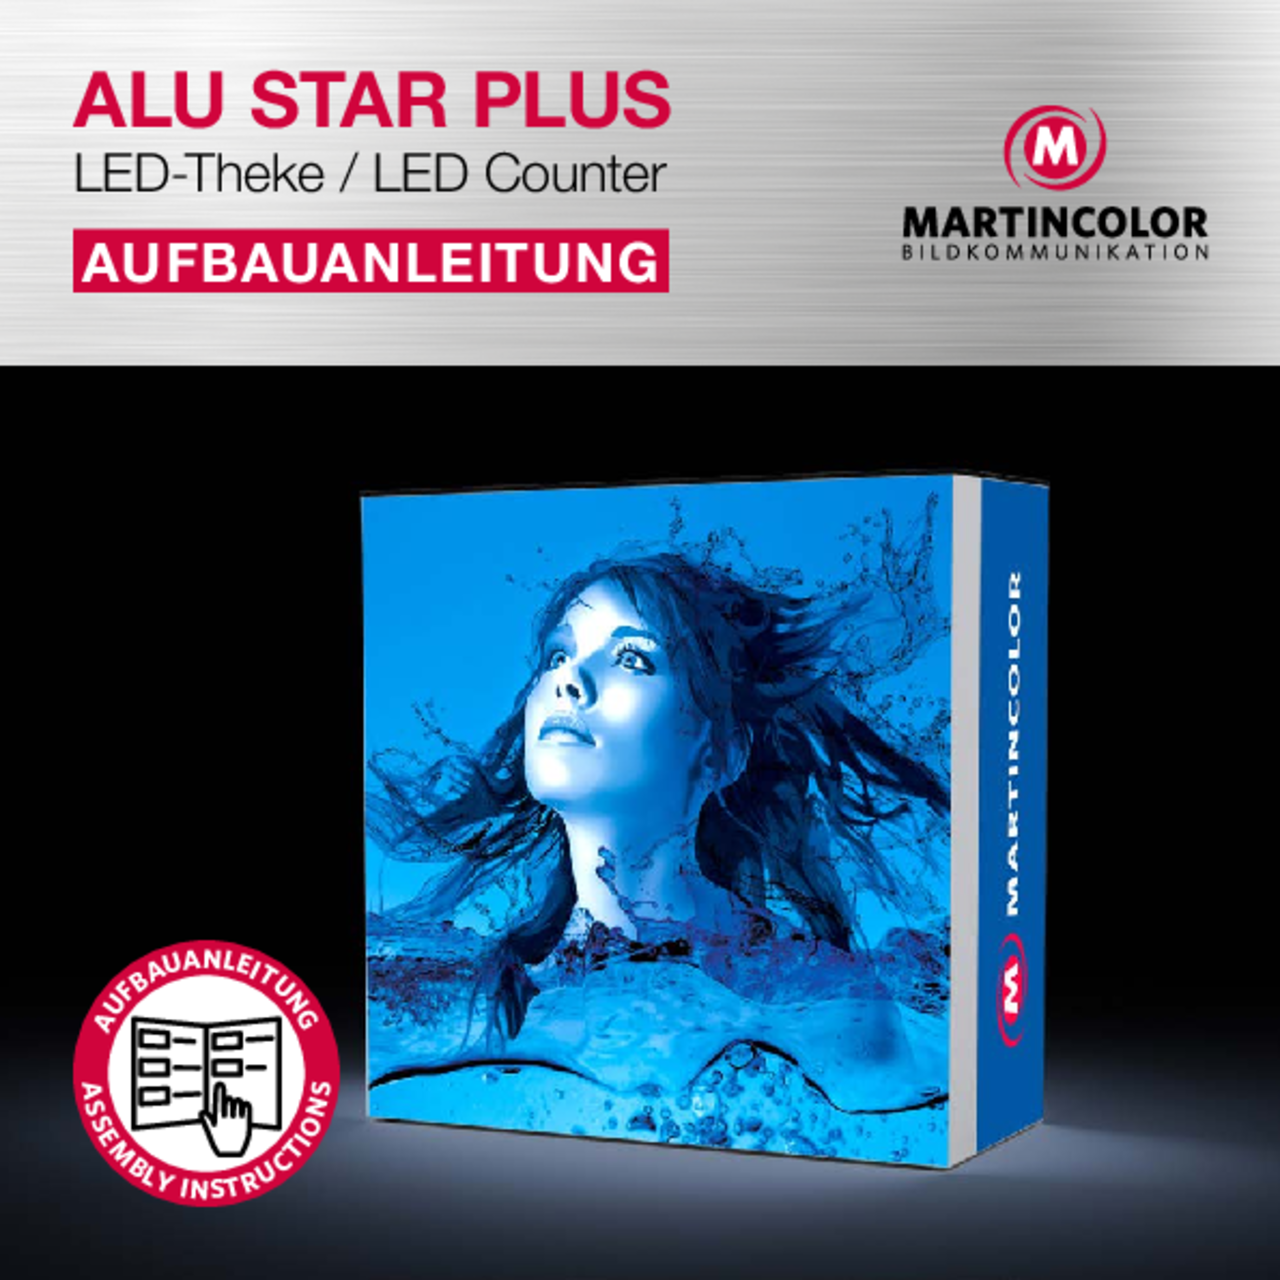 ALU STAR PLUS Counter assembly instructions PDF